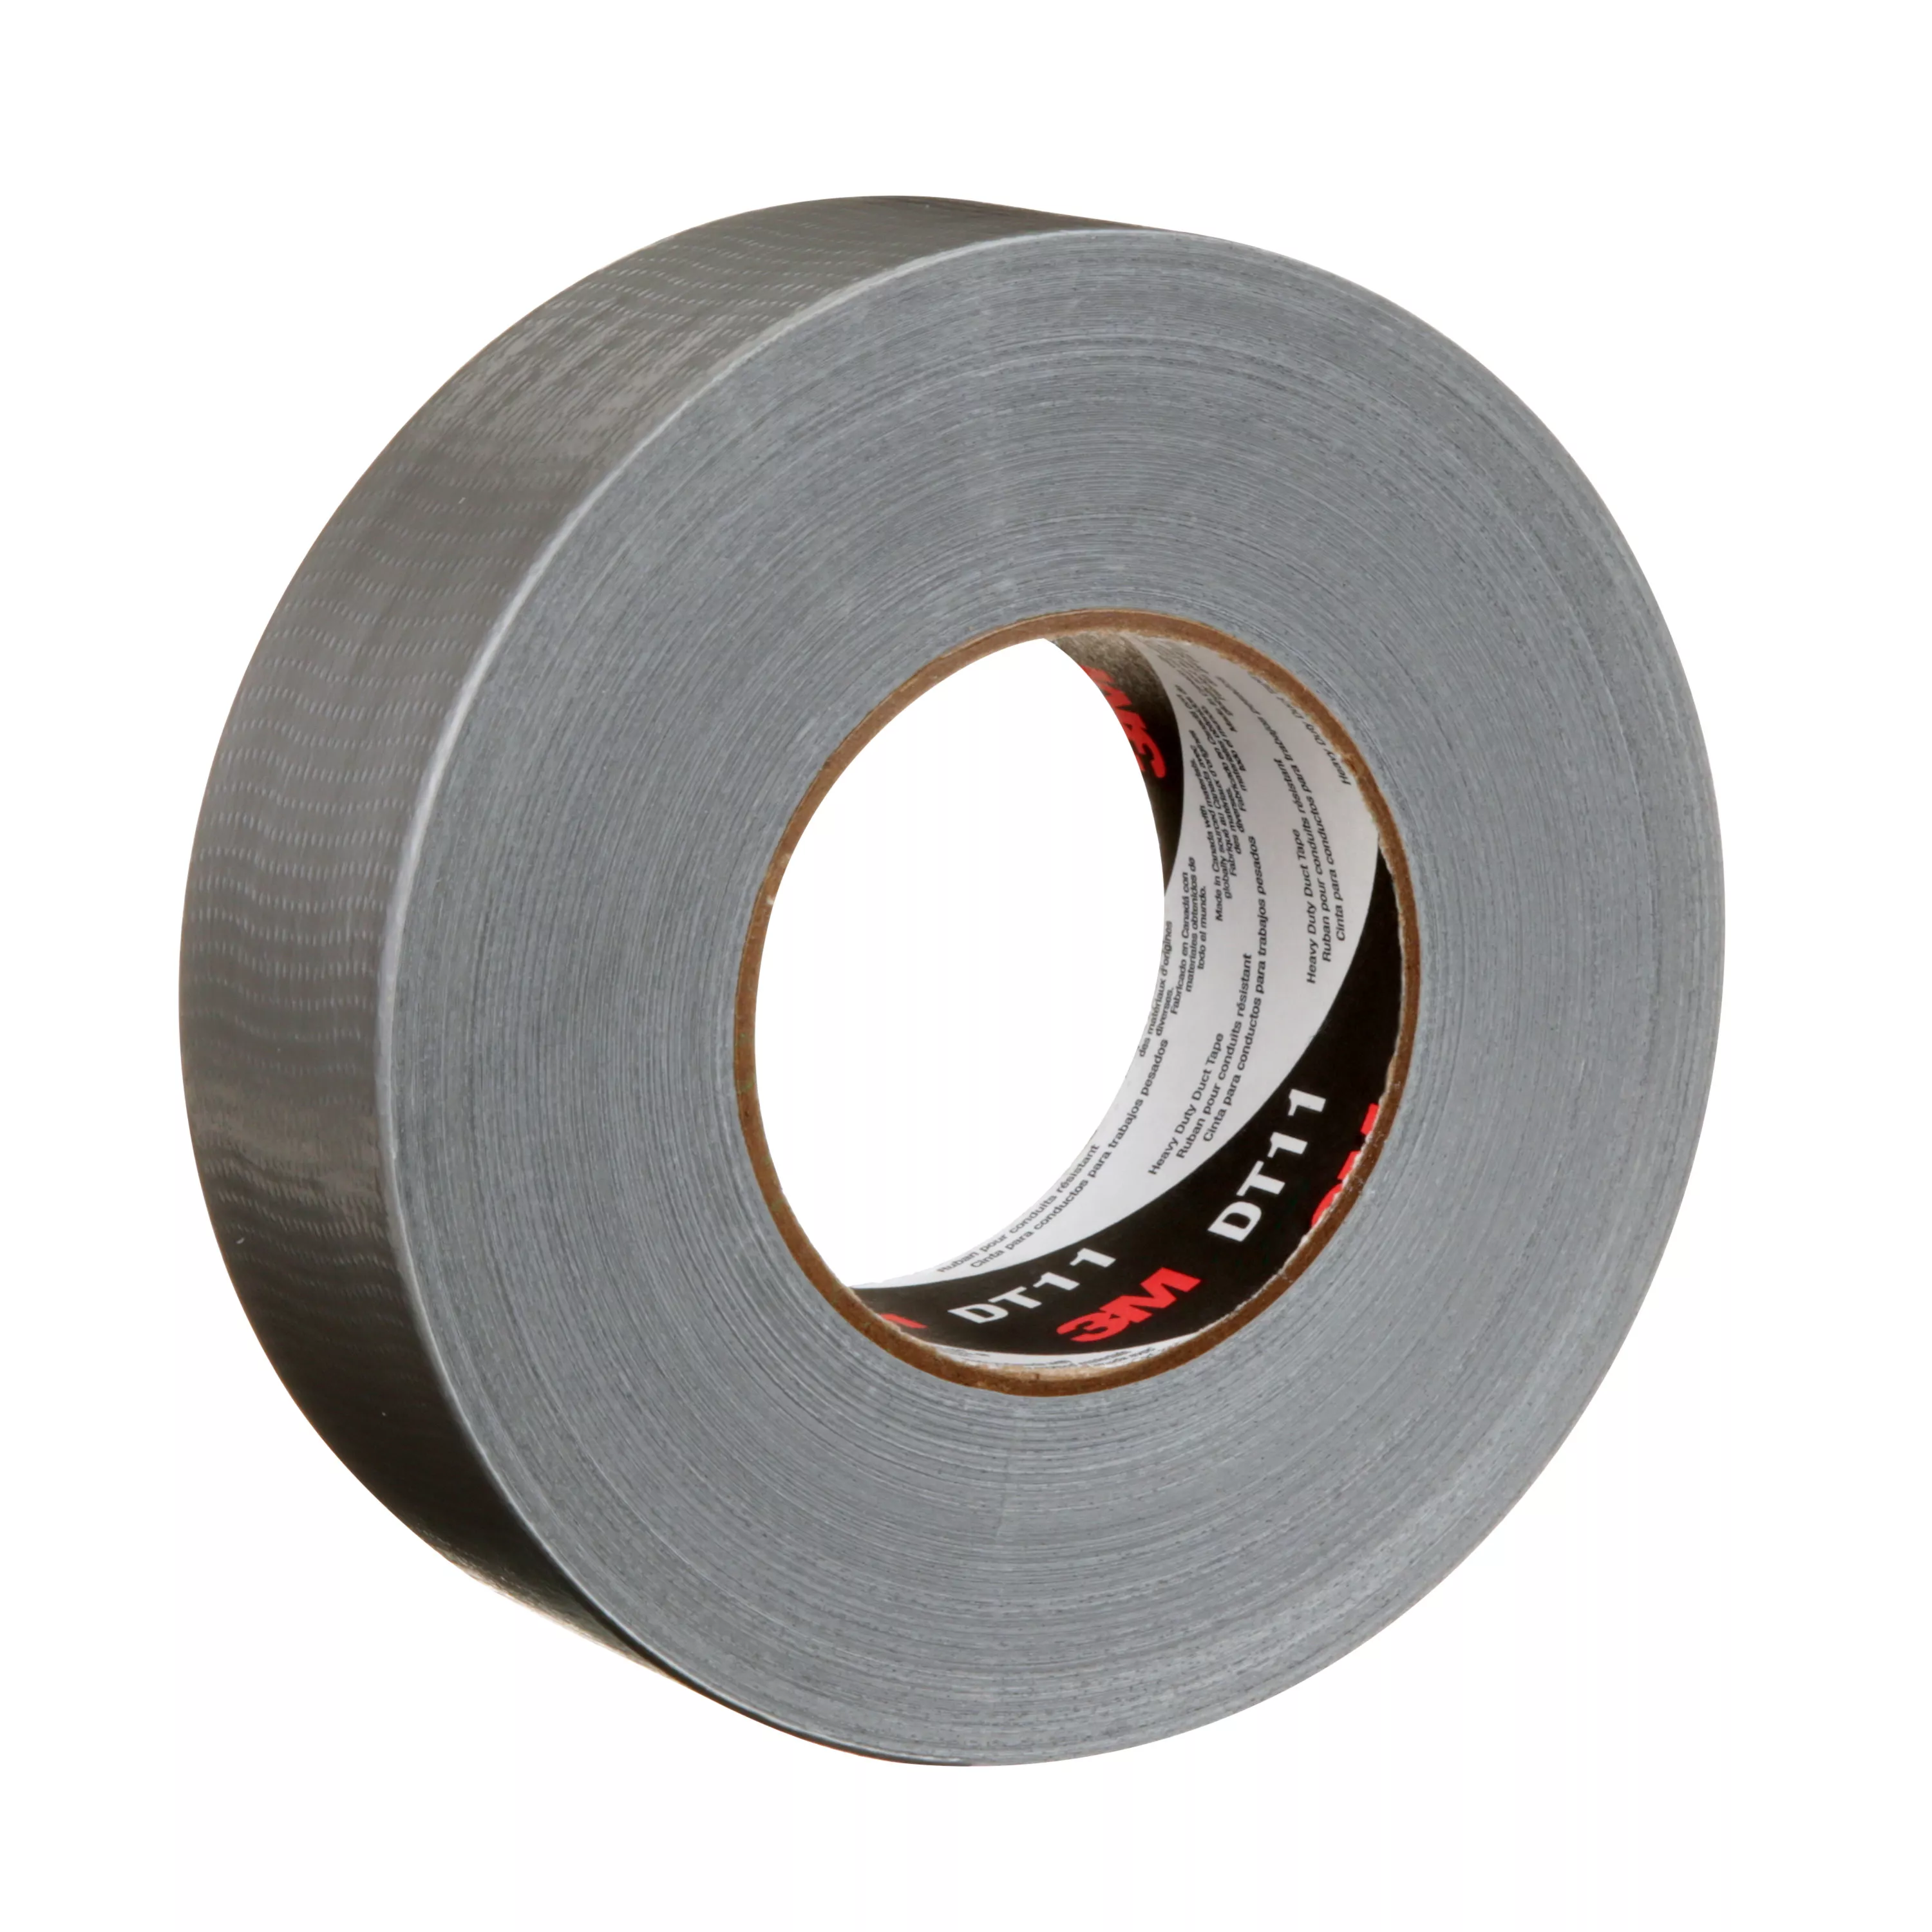 3M™ Heavy Duty Duct Tape DT11, Silver, 48 mm x 54.8 m, 11 mil, 24
Roll/Case, Individually Wrapped Conveniently Packaged